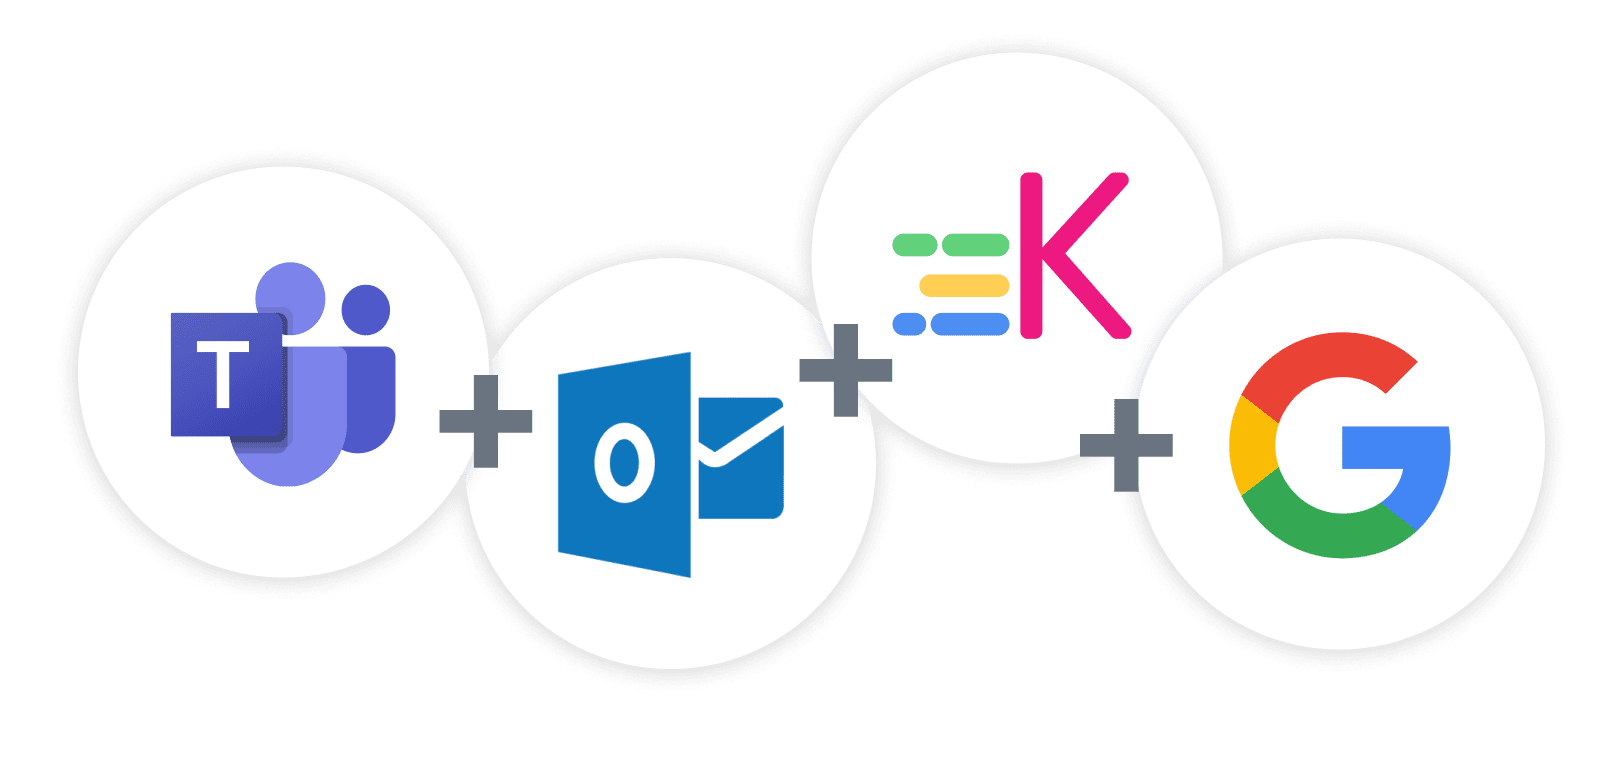 Microsoft Teams & Conference room booking integrations